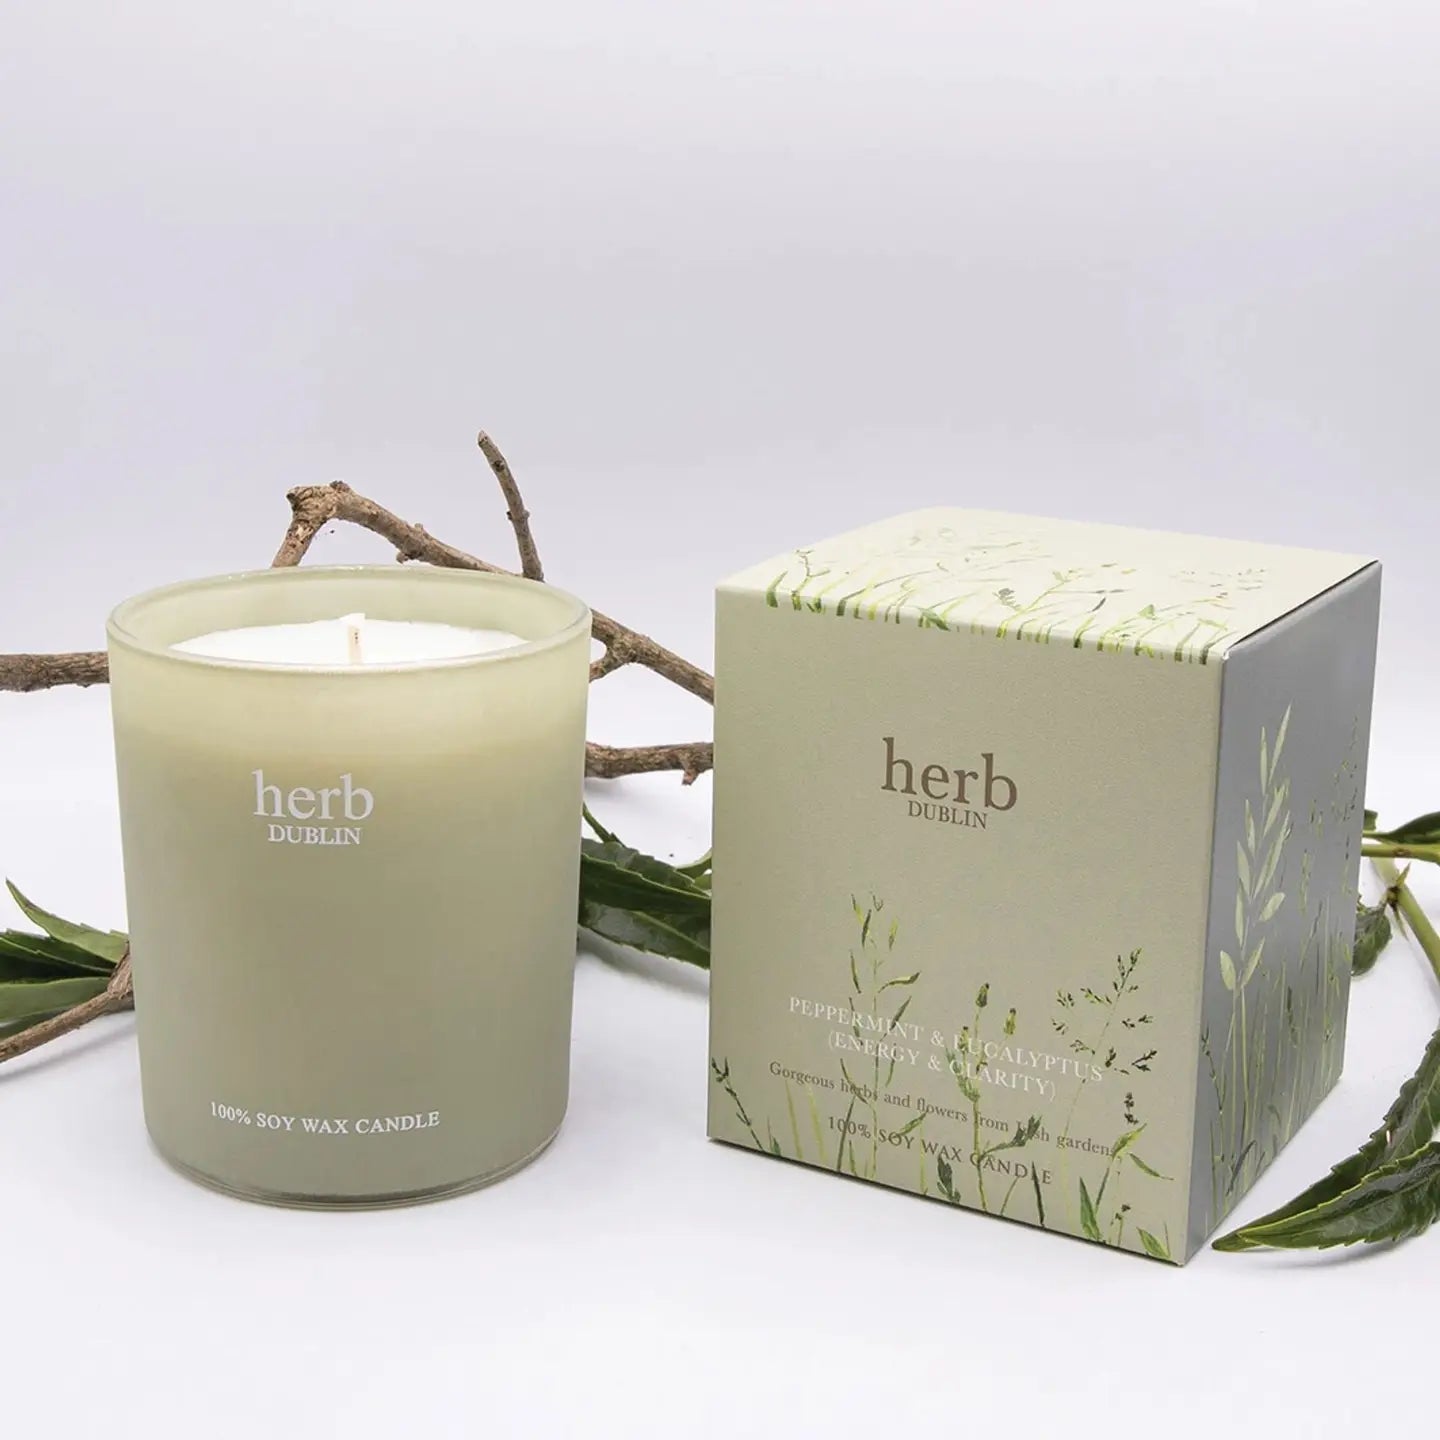 Herb Dublin Peppermint, Eucalyptus and Lime Candle